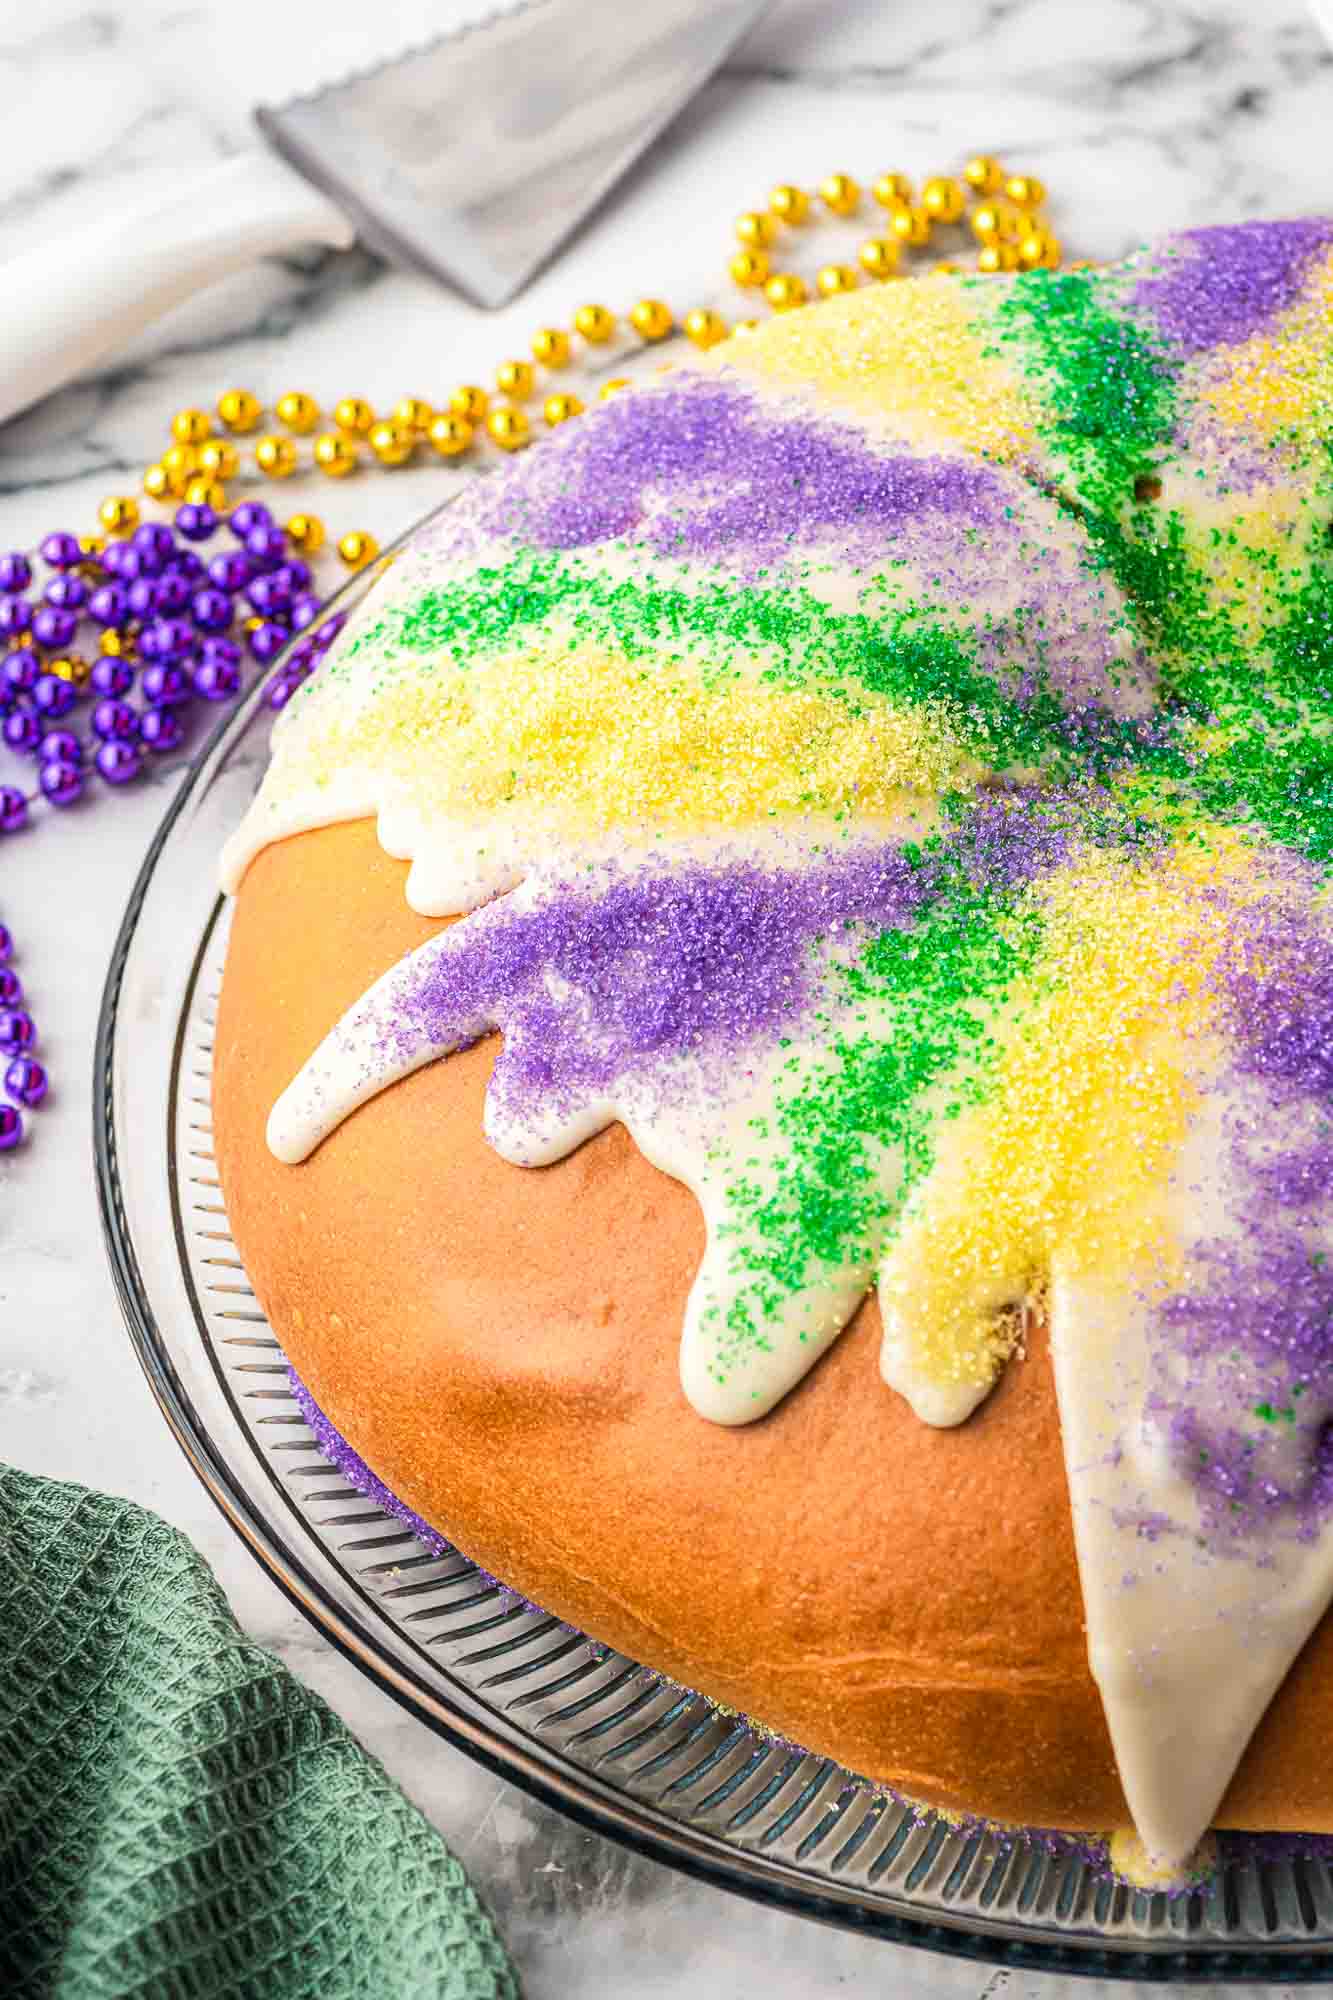 King cake decorated with icing and sanding sugar